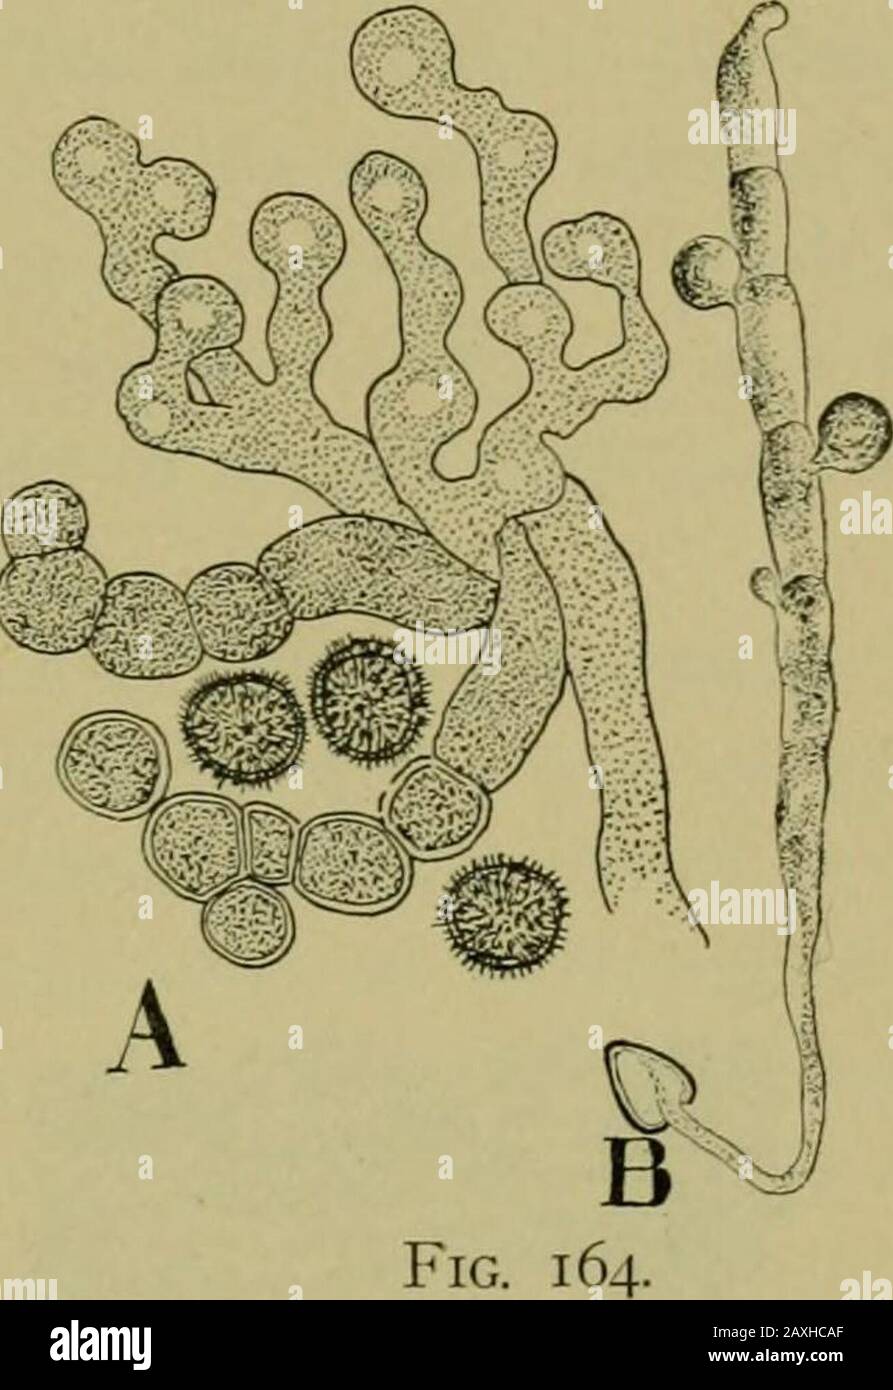 Nature and development of plants . Fig. 163. Fig. 163. A common smut, Ustilago, transforming the kernels of corninto sooty black pustules. Fig. 164. The formation and germination of the spores of a smut: A, the formation of the spores from the mycelium in the kernel of corn. B, germination of a spore and the appearance of the basidiospore. takes place when the spores come in contact with the seed. Con-sequently, in these cases, the fungus can more readily be foughtby treating the seed with some fungicide as formaline and coppersulphate. 96. Order c. Agaricales or Mushrooms and Toadstools.—This Stock Photo